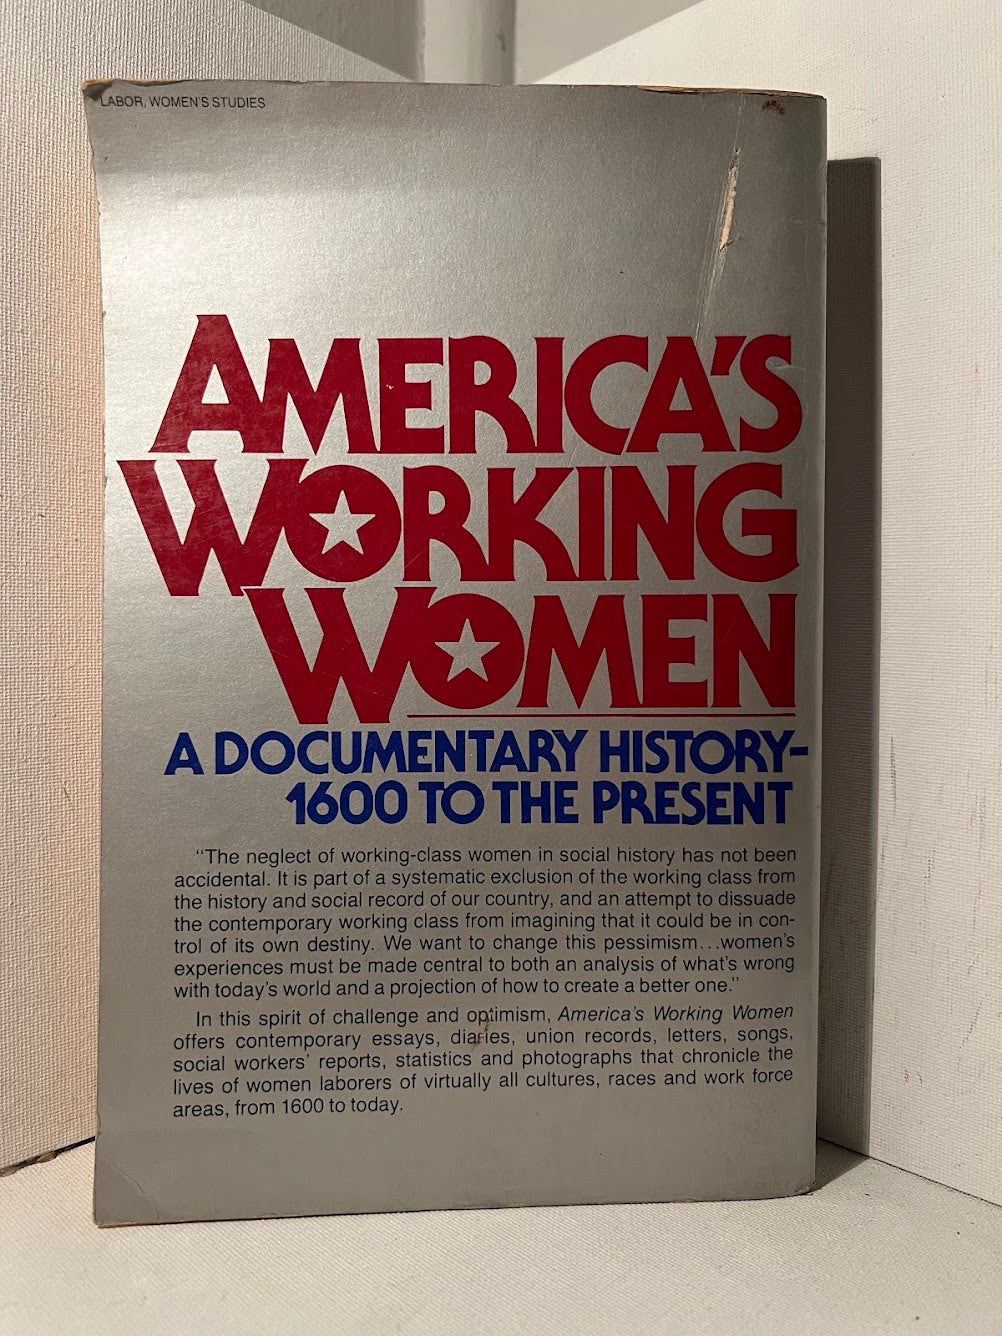 America's Working Women: A Documentary History compiled and edited by Rosalyn Baxandall, Linda Gordon, Susan Reverby